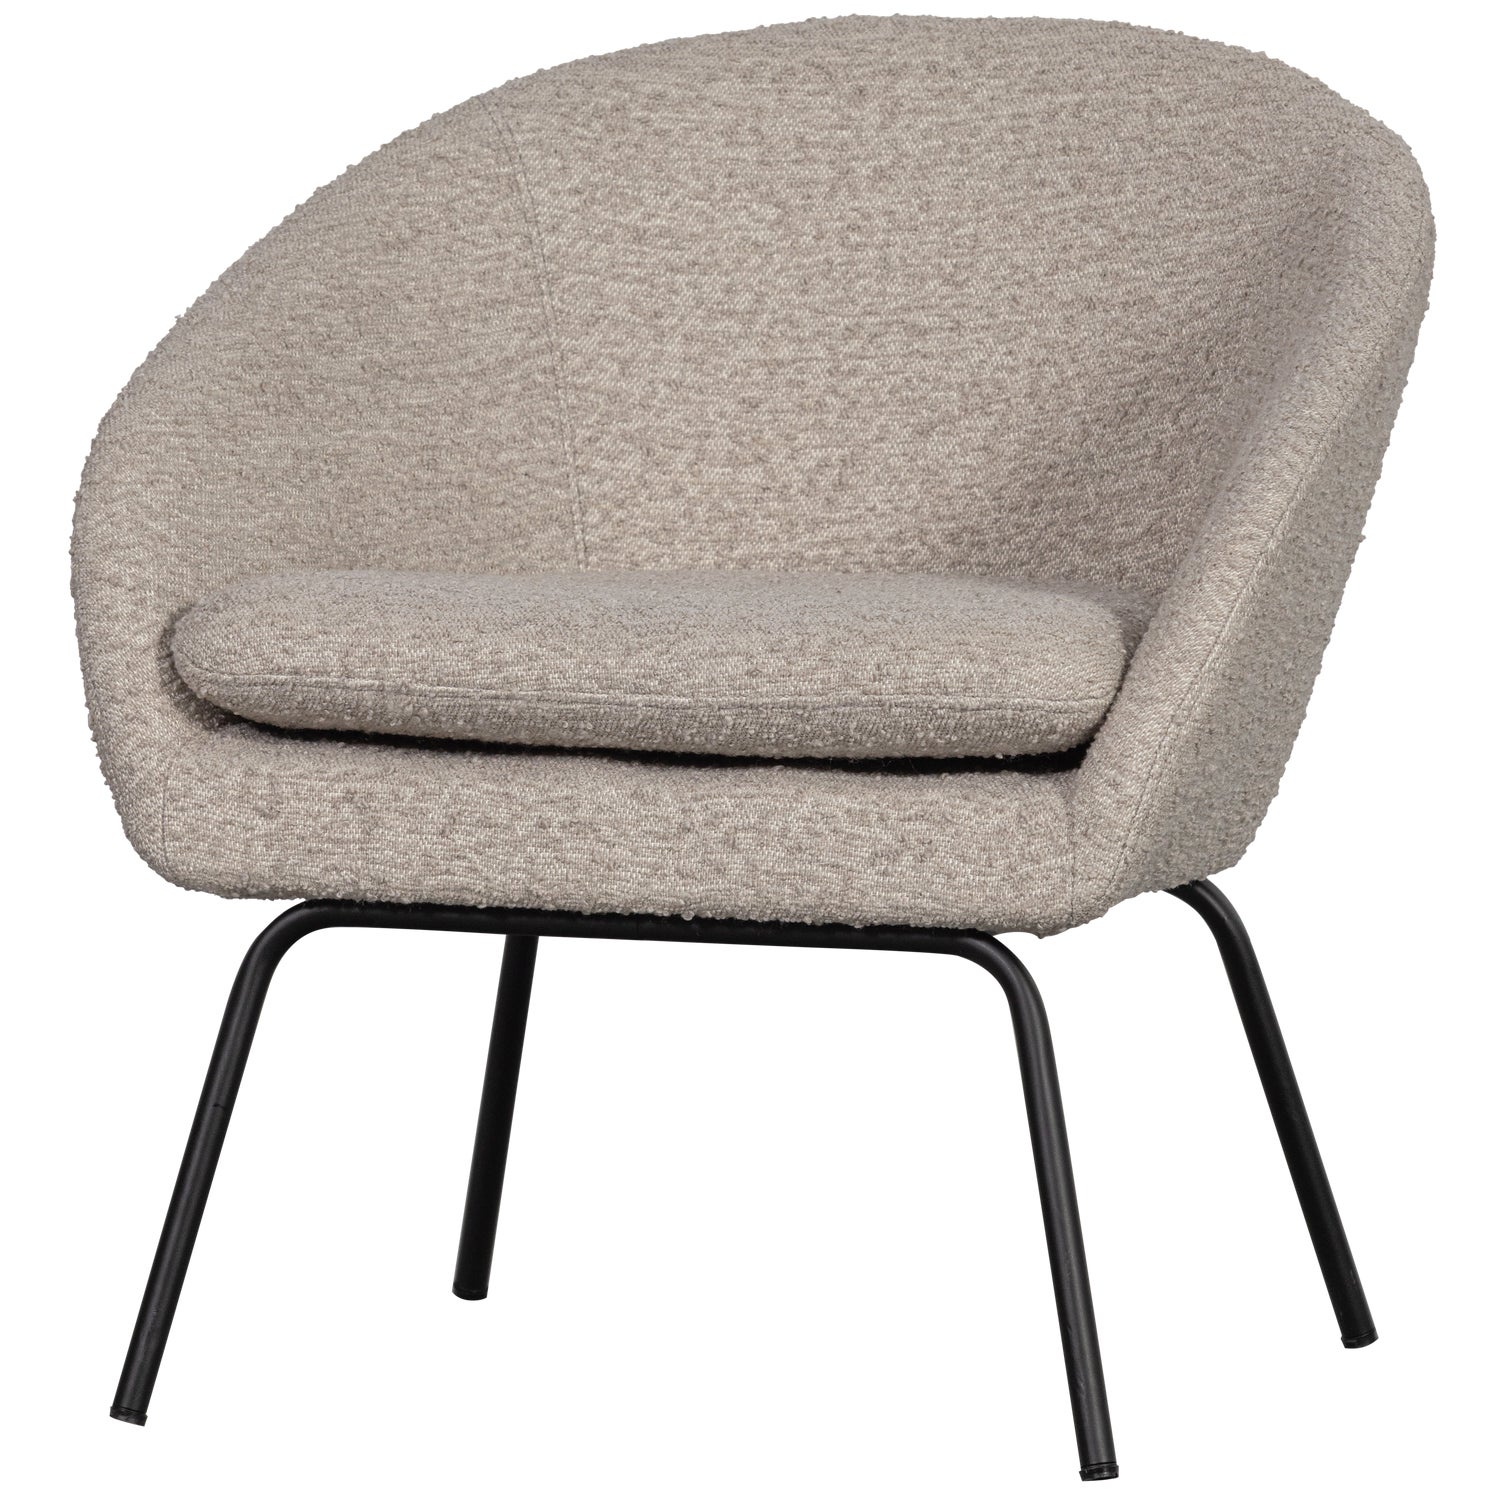 375919-G-02_VS_KW_Ditte_fauteuil_boucle_greige_SA.png?auto=webp&format=png&width=1500&height=1500